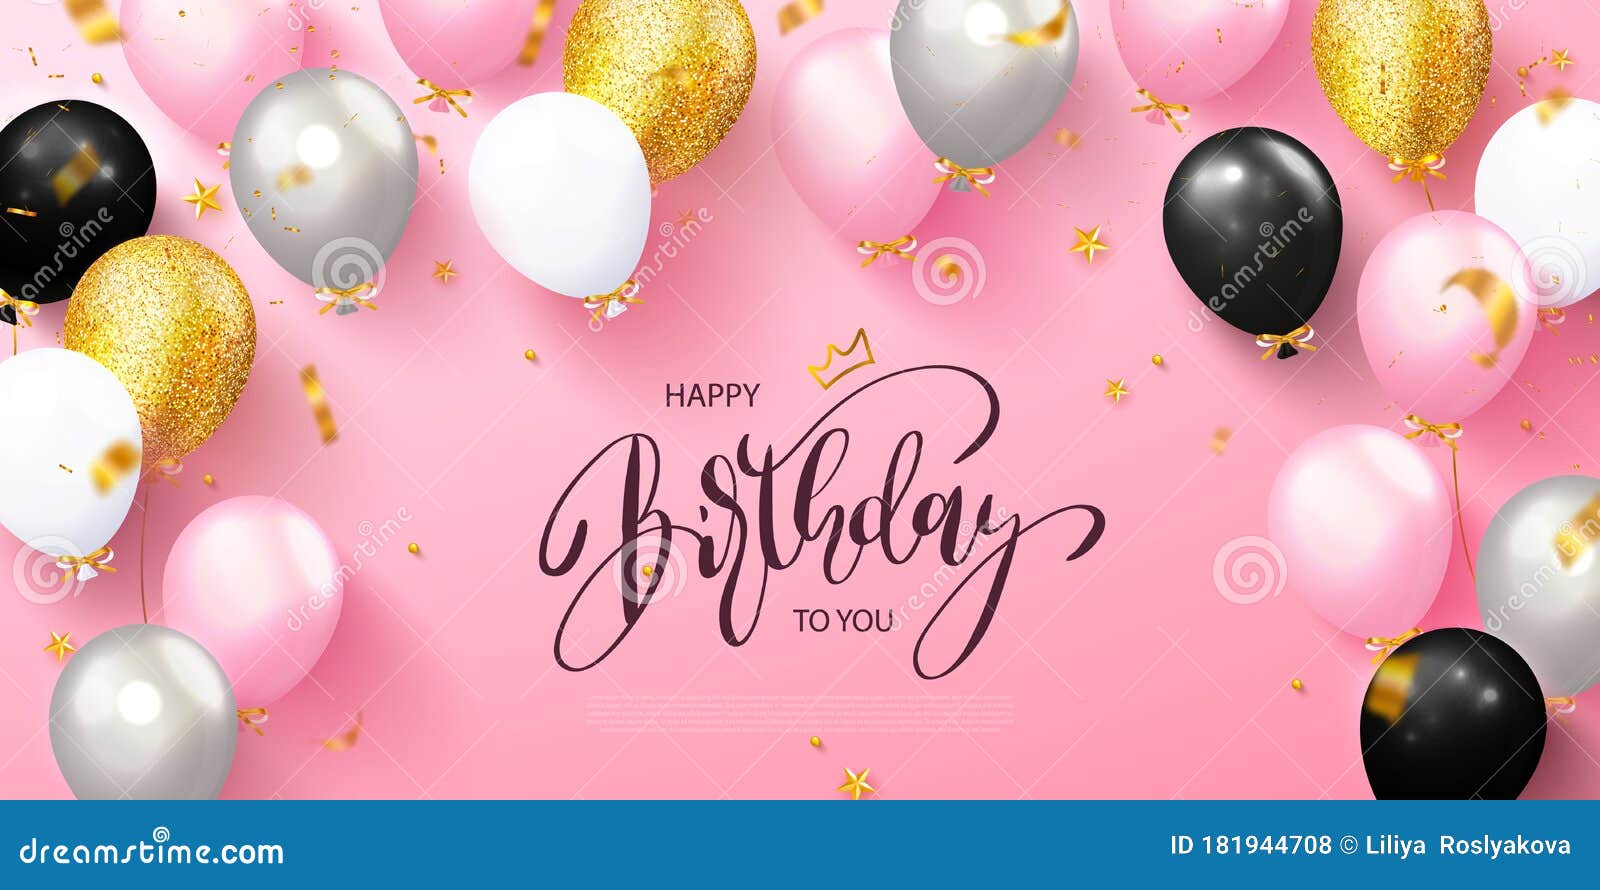 Happy Birthday Greeting Card with Colorful Balloons and Flying Serpentine  on Pink  Template for Birthday Stock Illustration -  Illustration of banner, card: 181944708